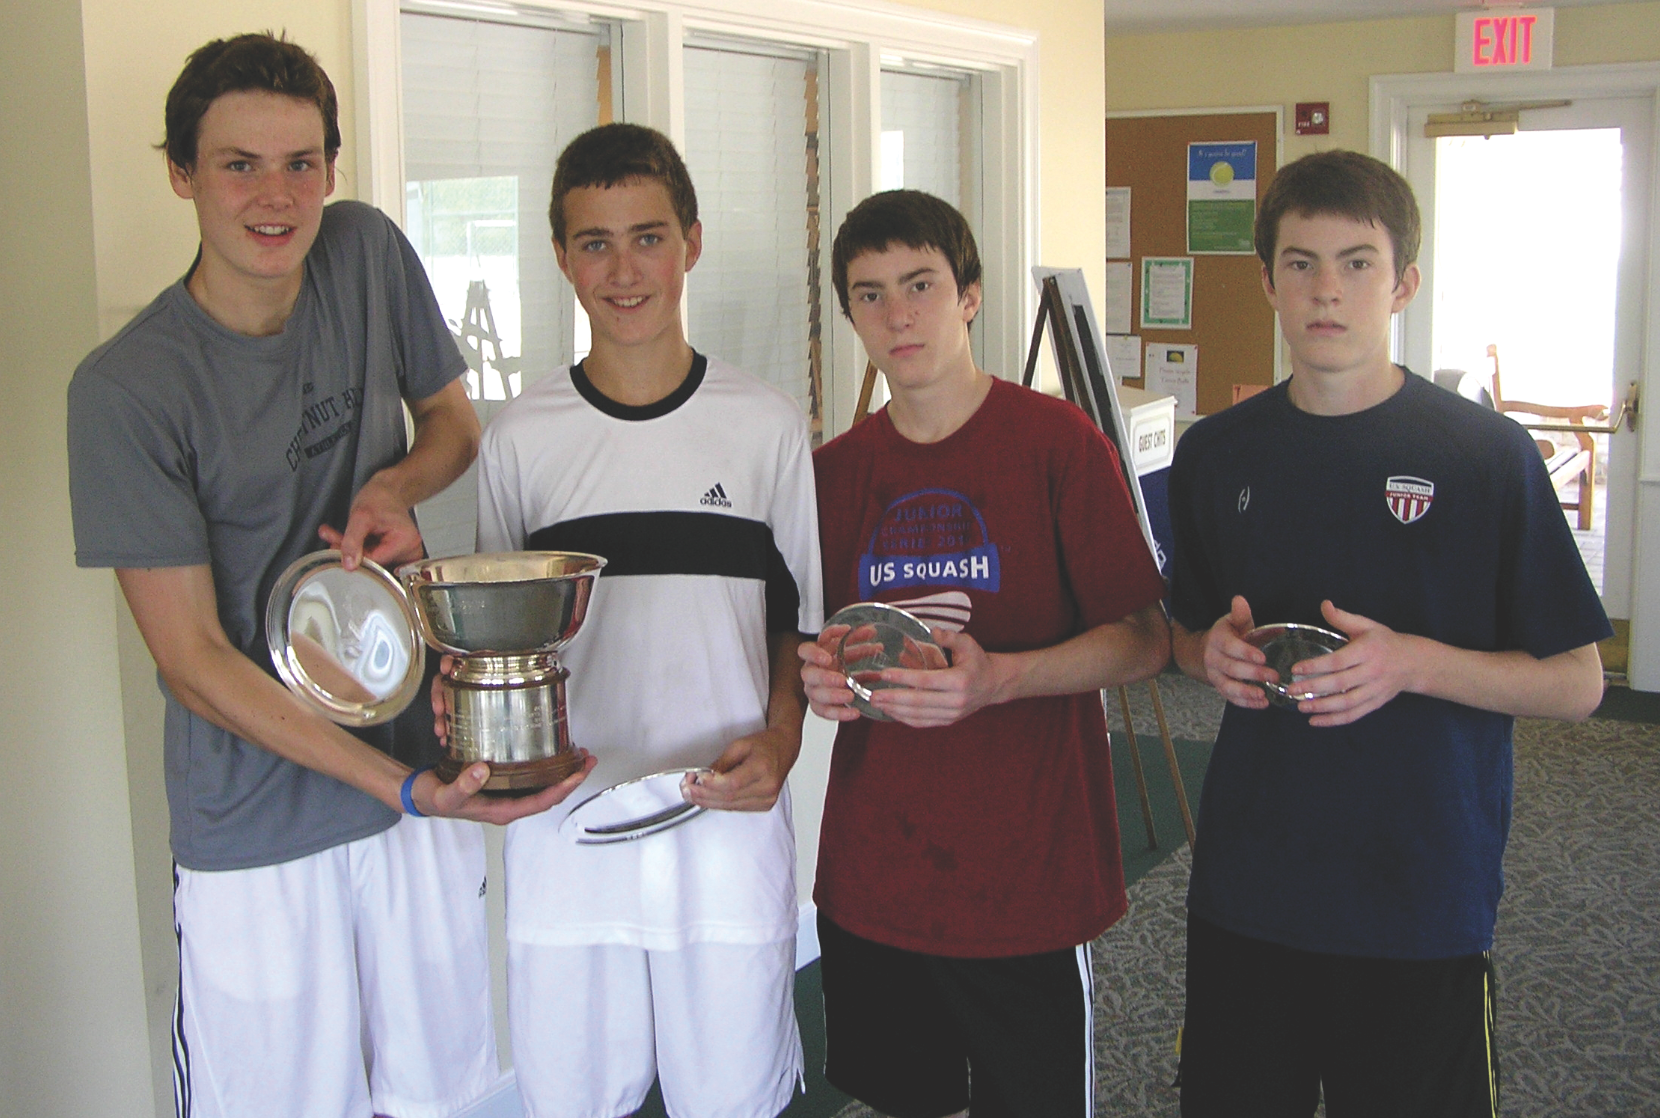 Boys' U17 Winners August Frank and Randy Beck with Runners-Up Alex McCall and Peter McCall.